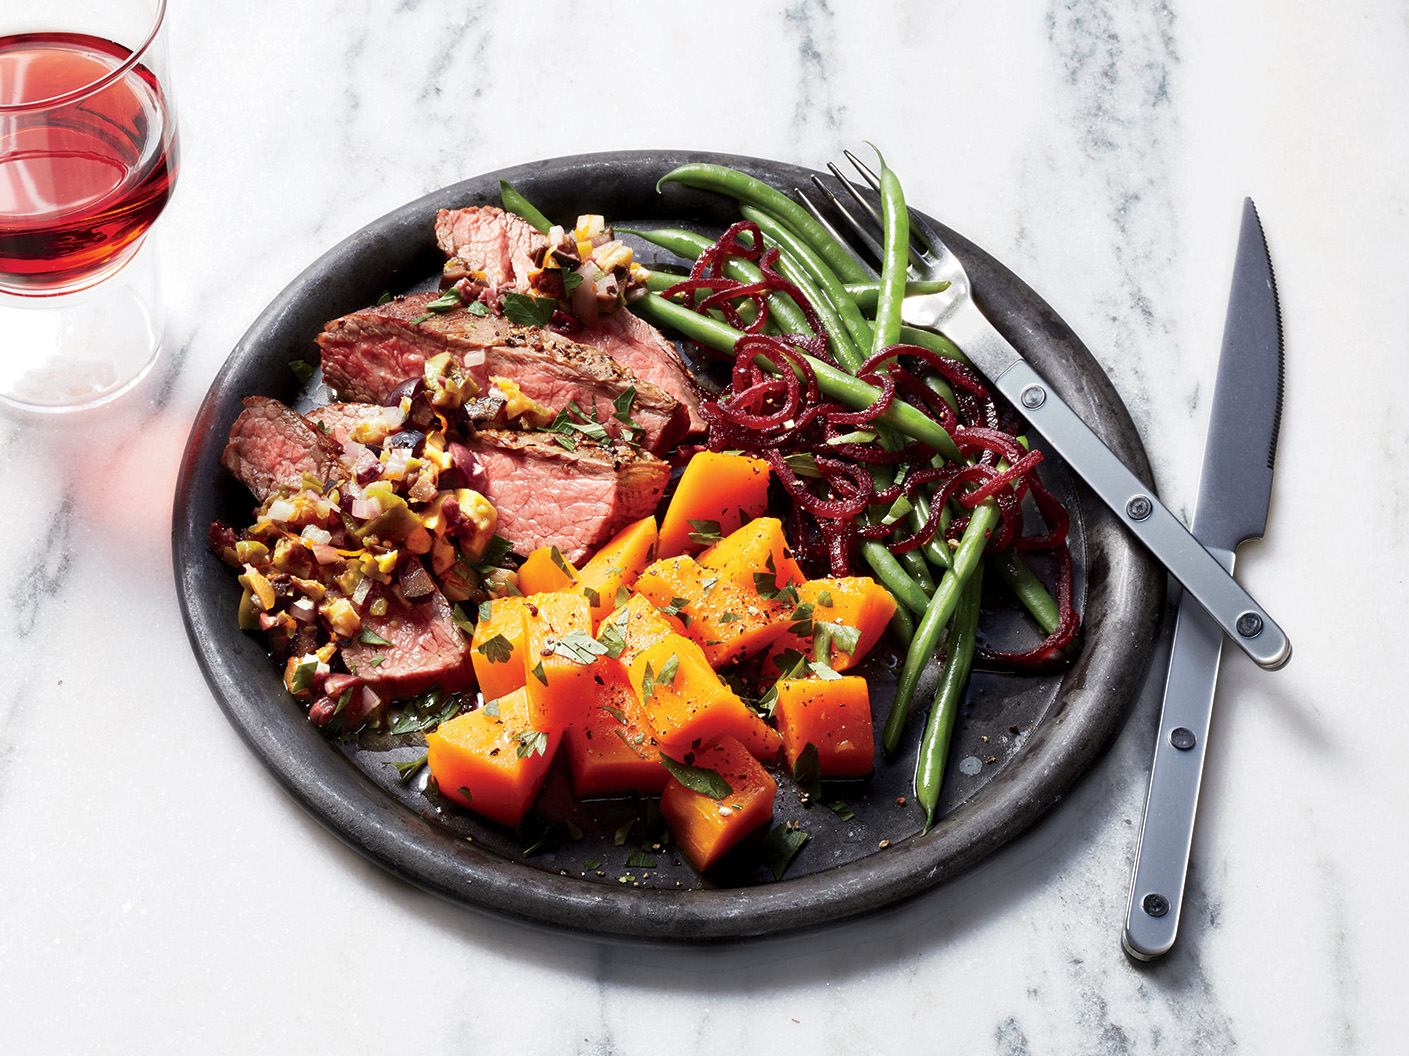 Steak with Mixed Olive Tapenade, Butternut Squash, and Green Beans